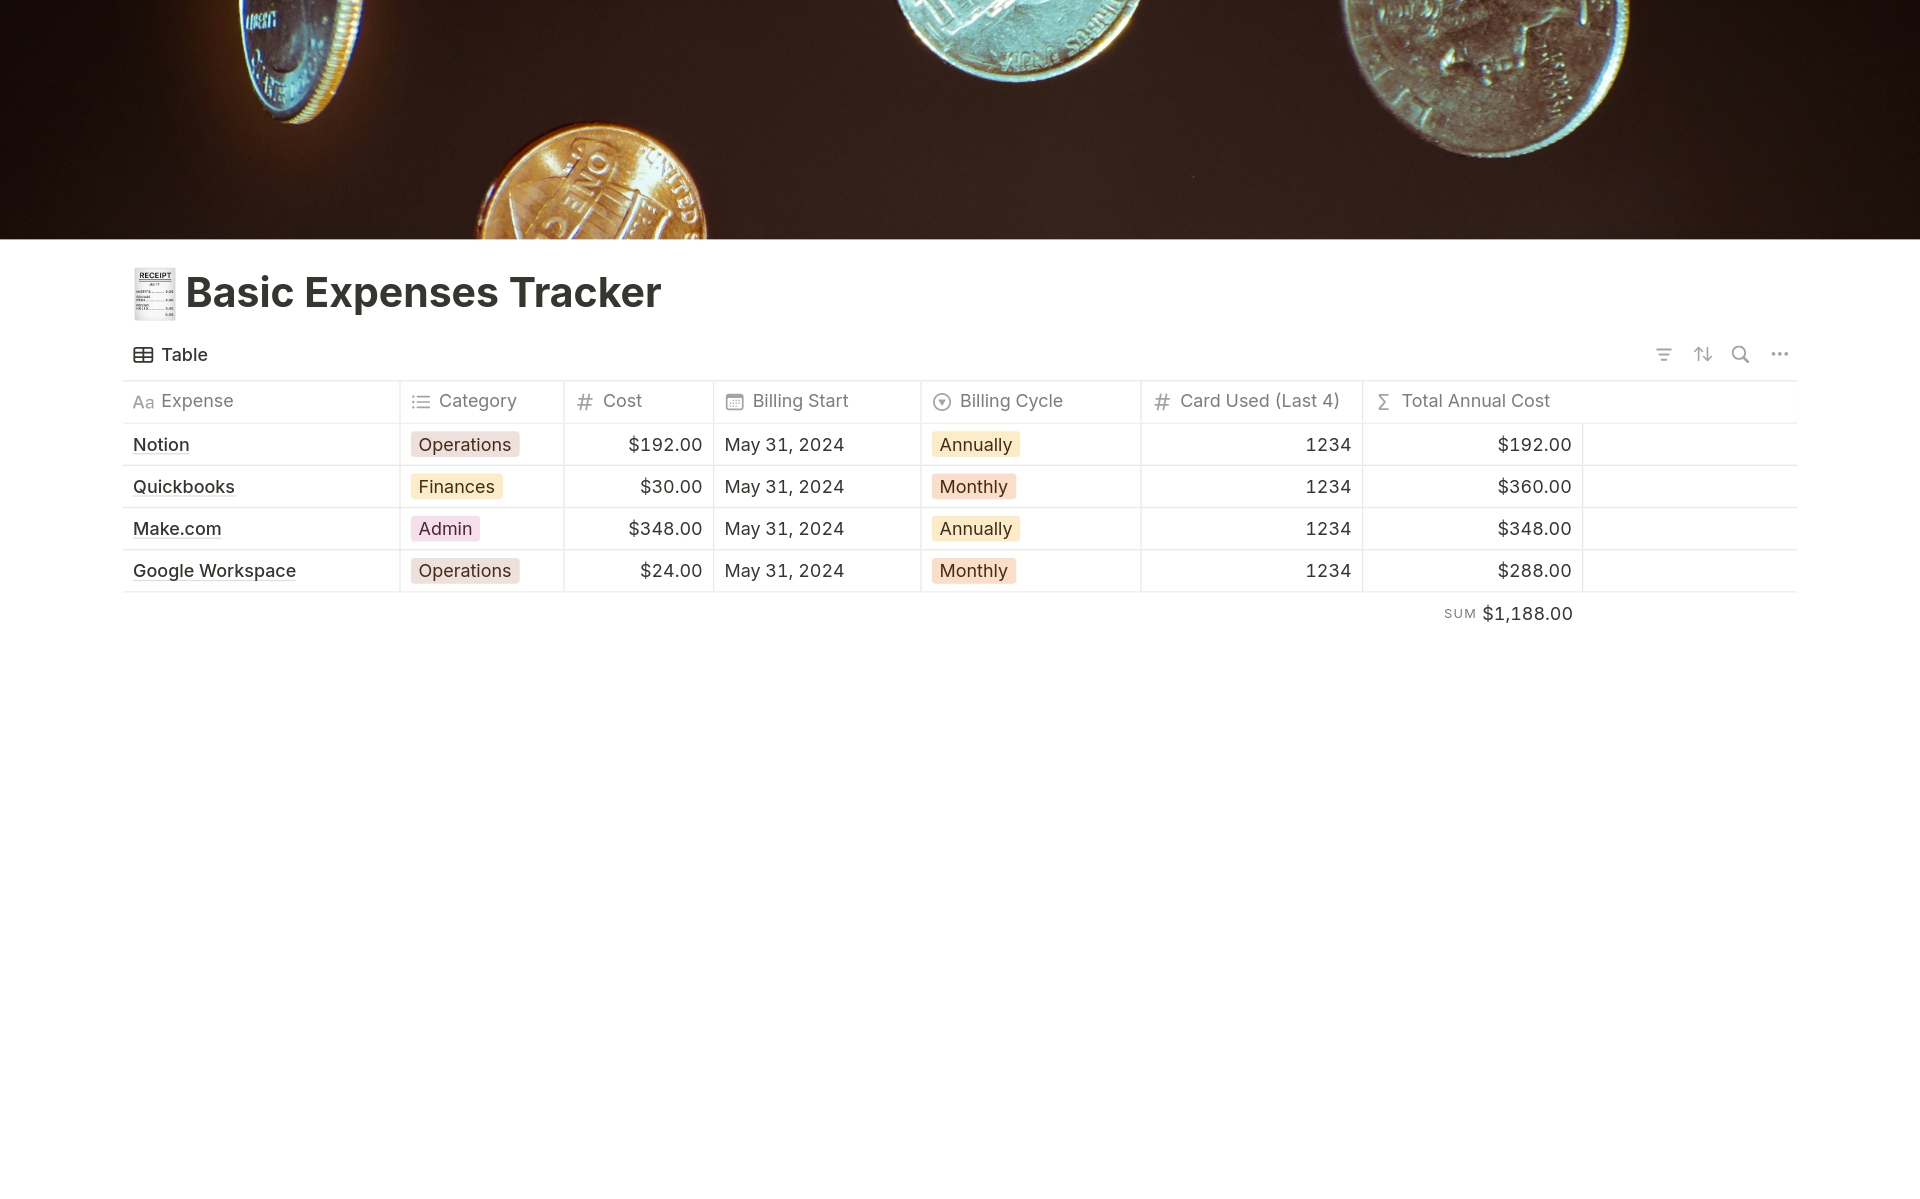 A simple expenses tracker to be used by individuals or businesses to track their fixed expenses.